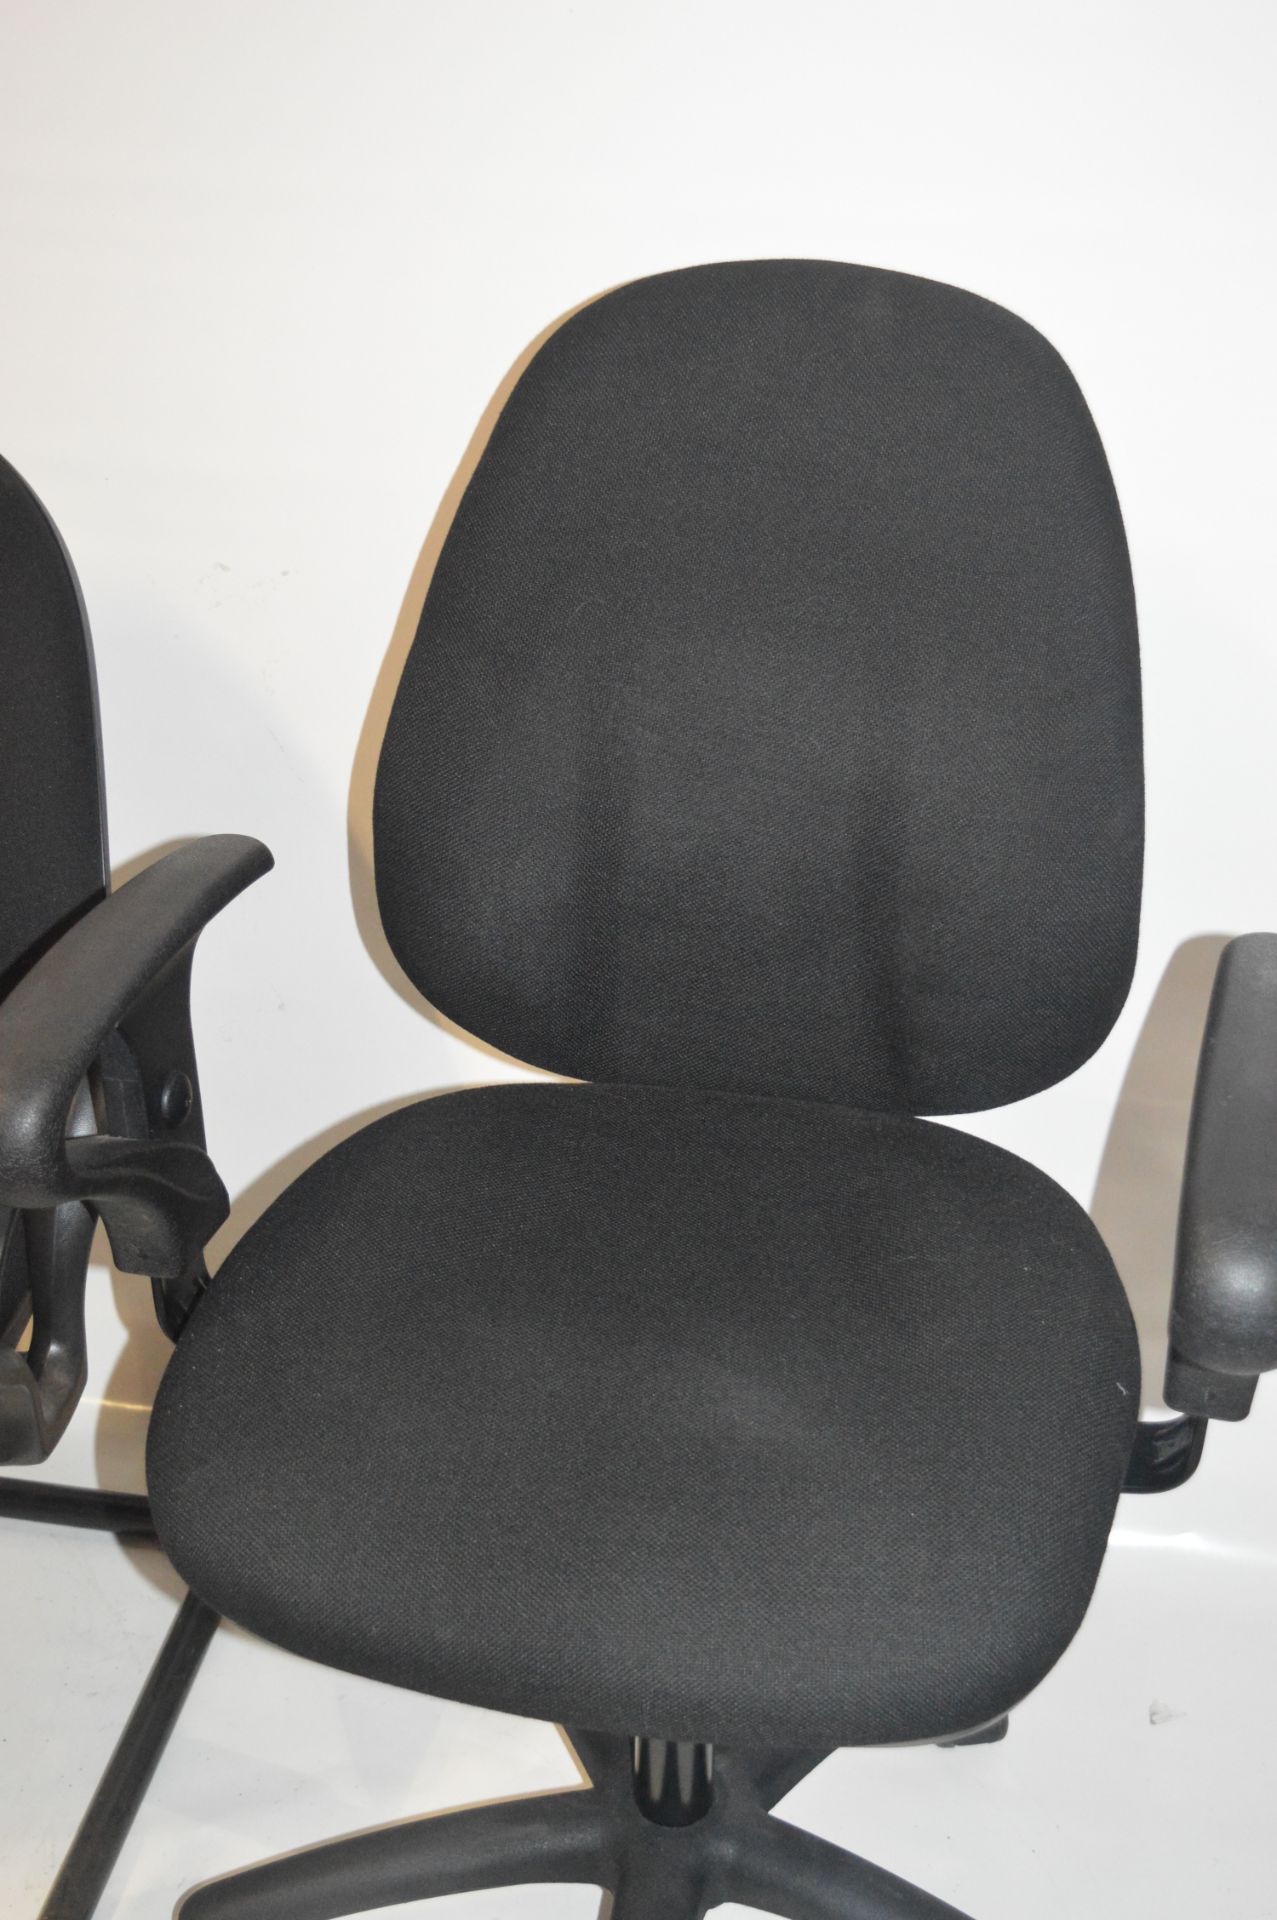 3 x Various Black Office Chairs - CL011 - Ref JP175 - Removed From Office Environment - Location: - Image 5 of 5